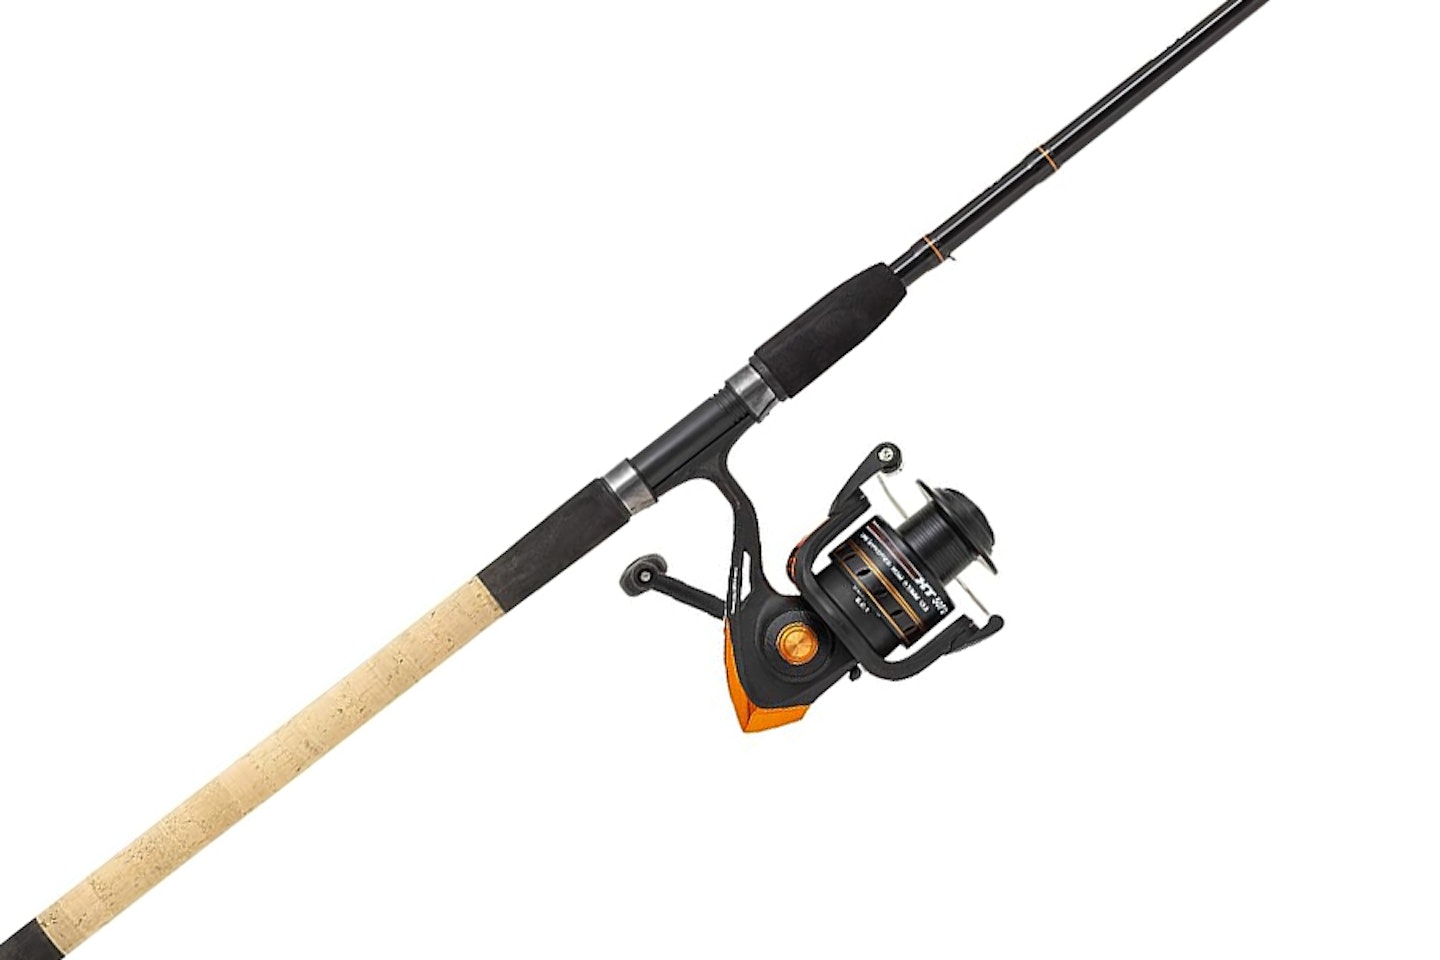 Shakespeare Best and Reel Combo Barbel Fishing Equipment for Sale